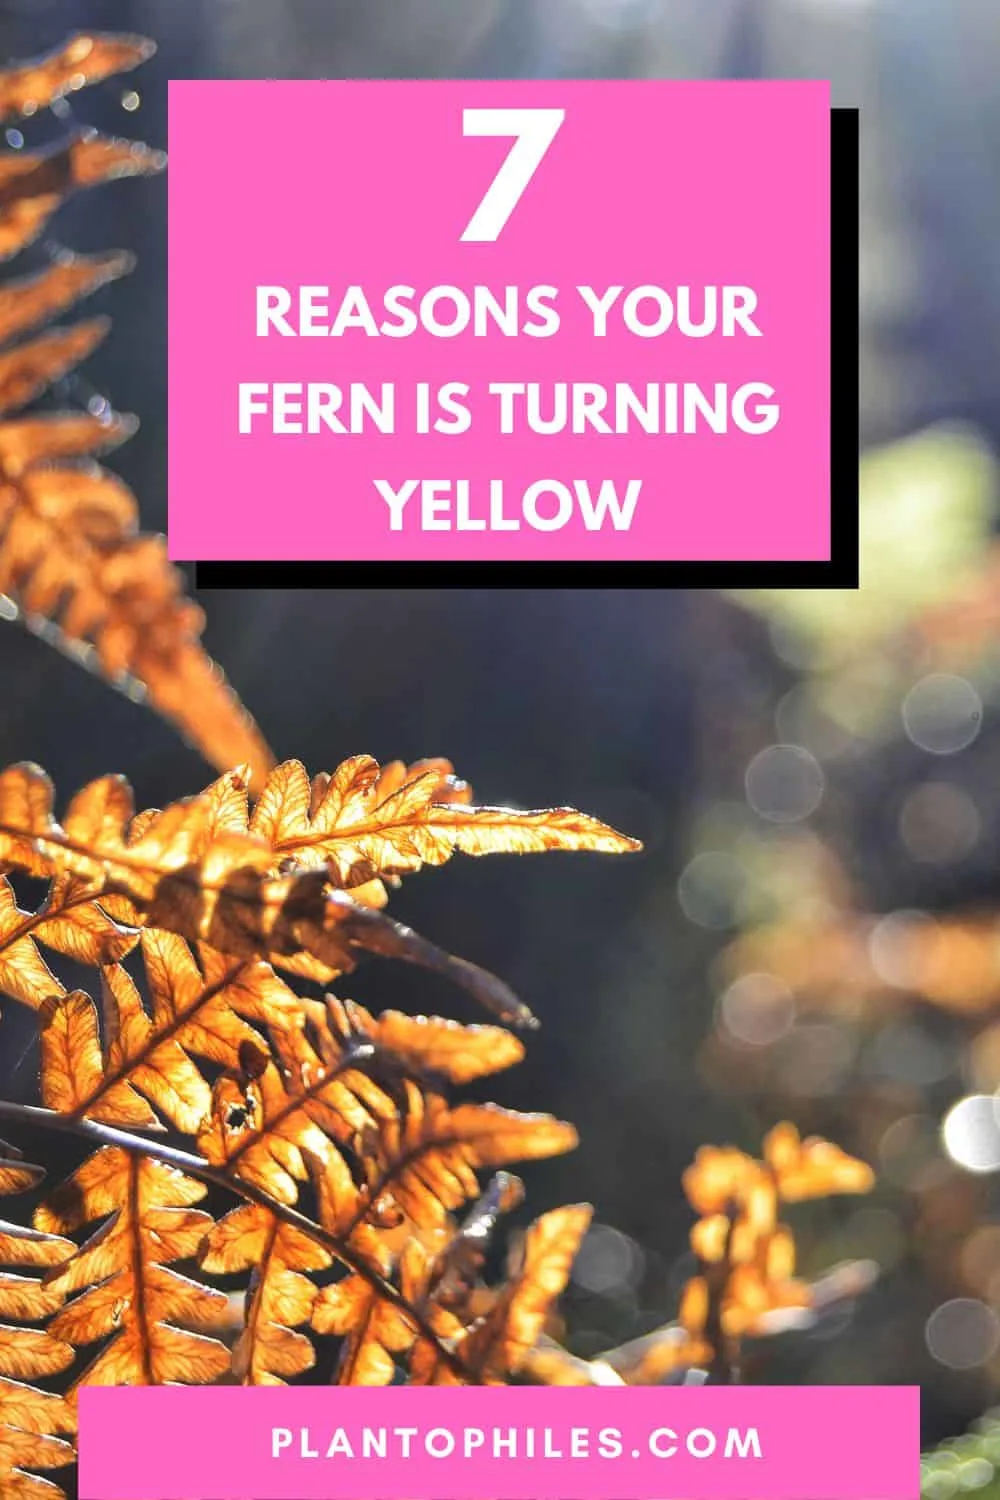 7 Reasons Your Fern is Turning Yellow